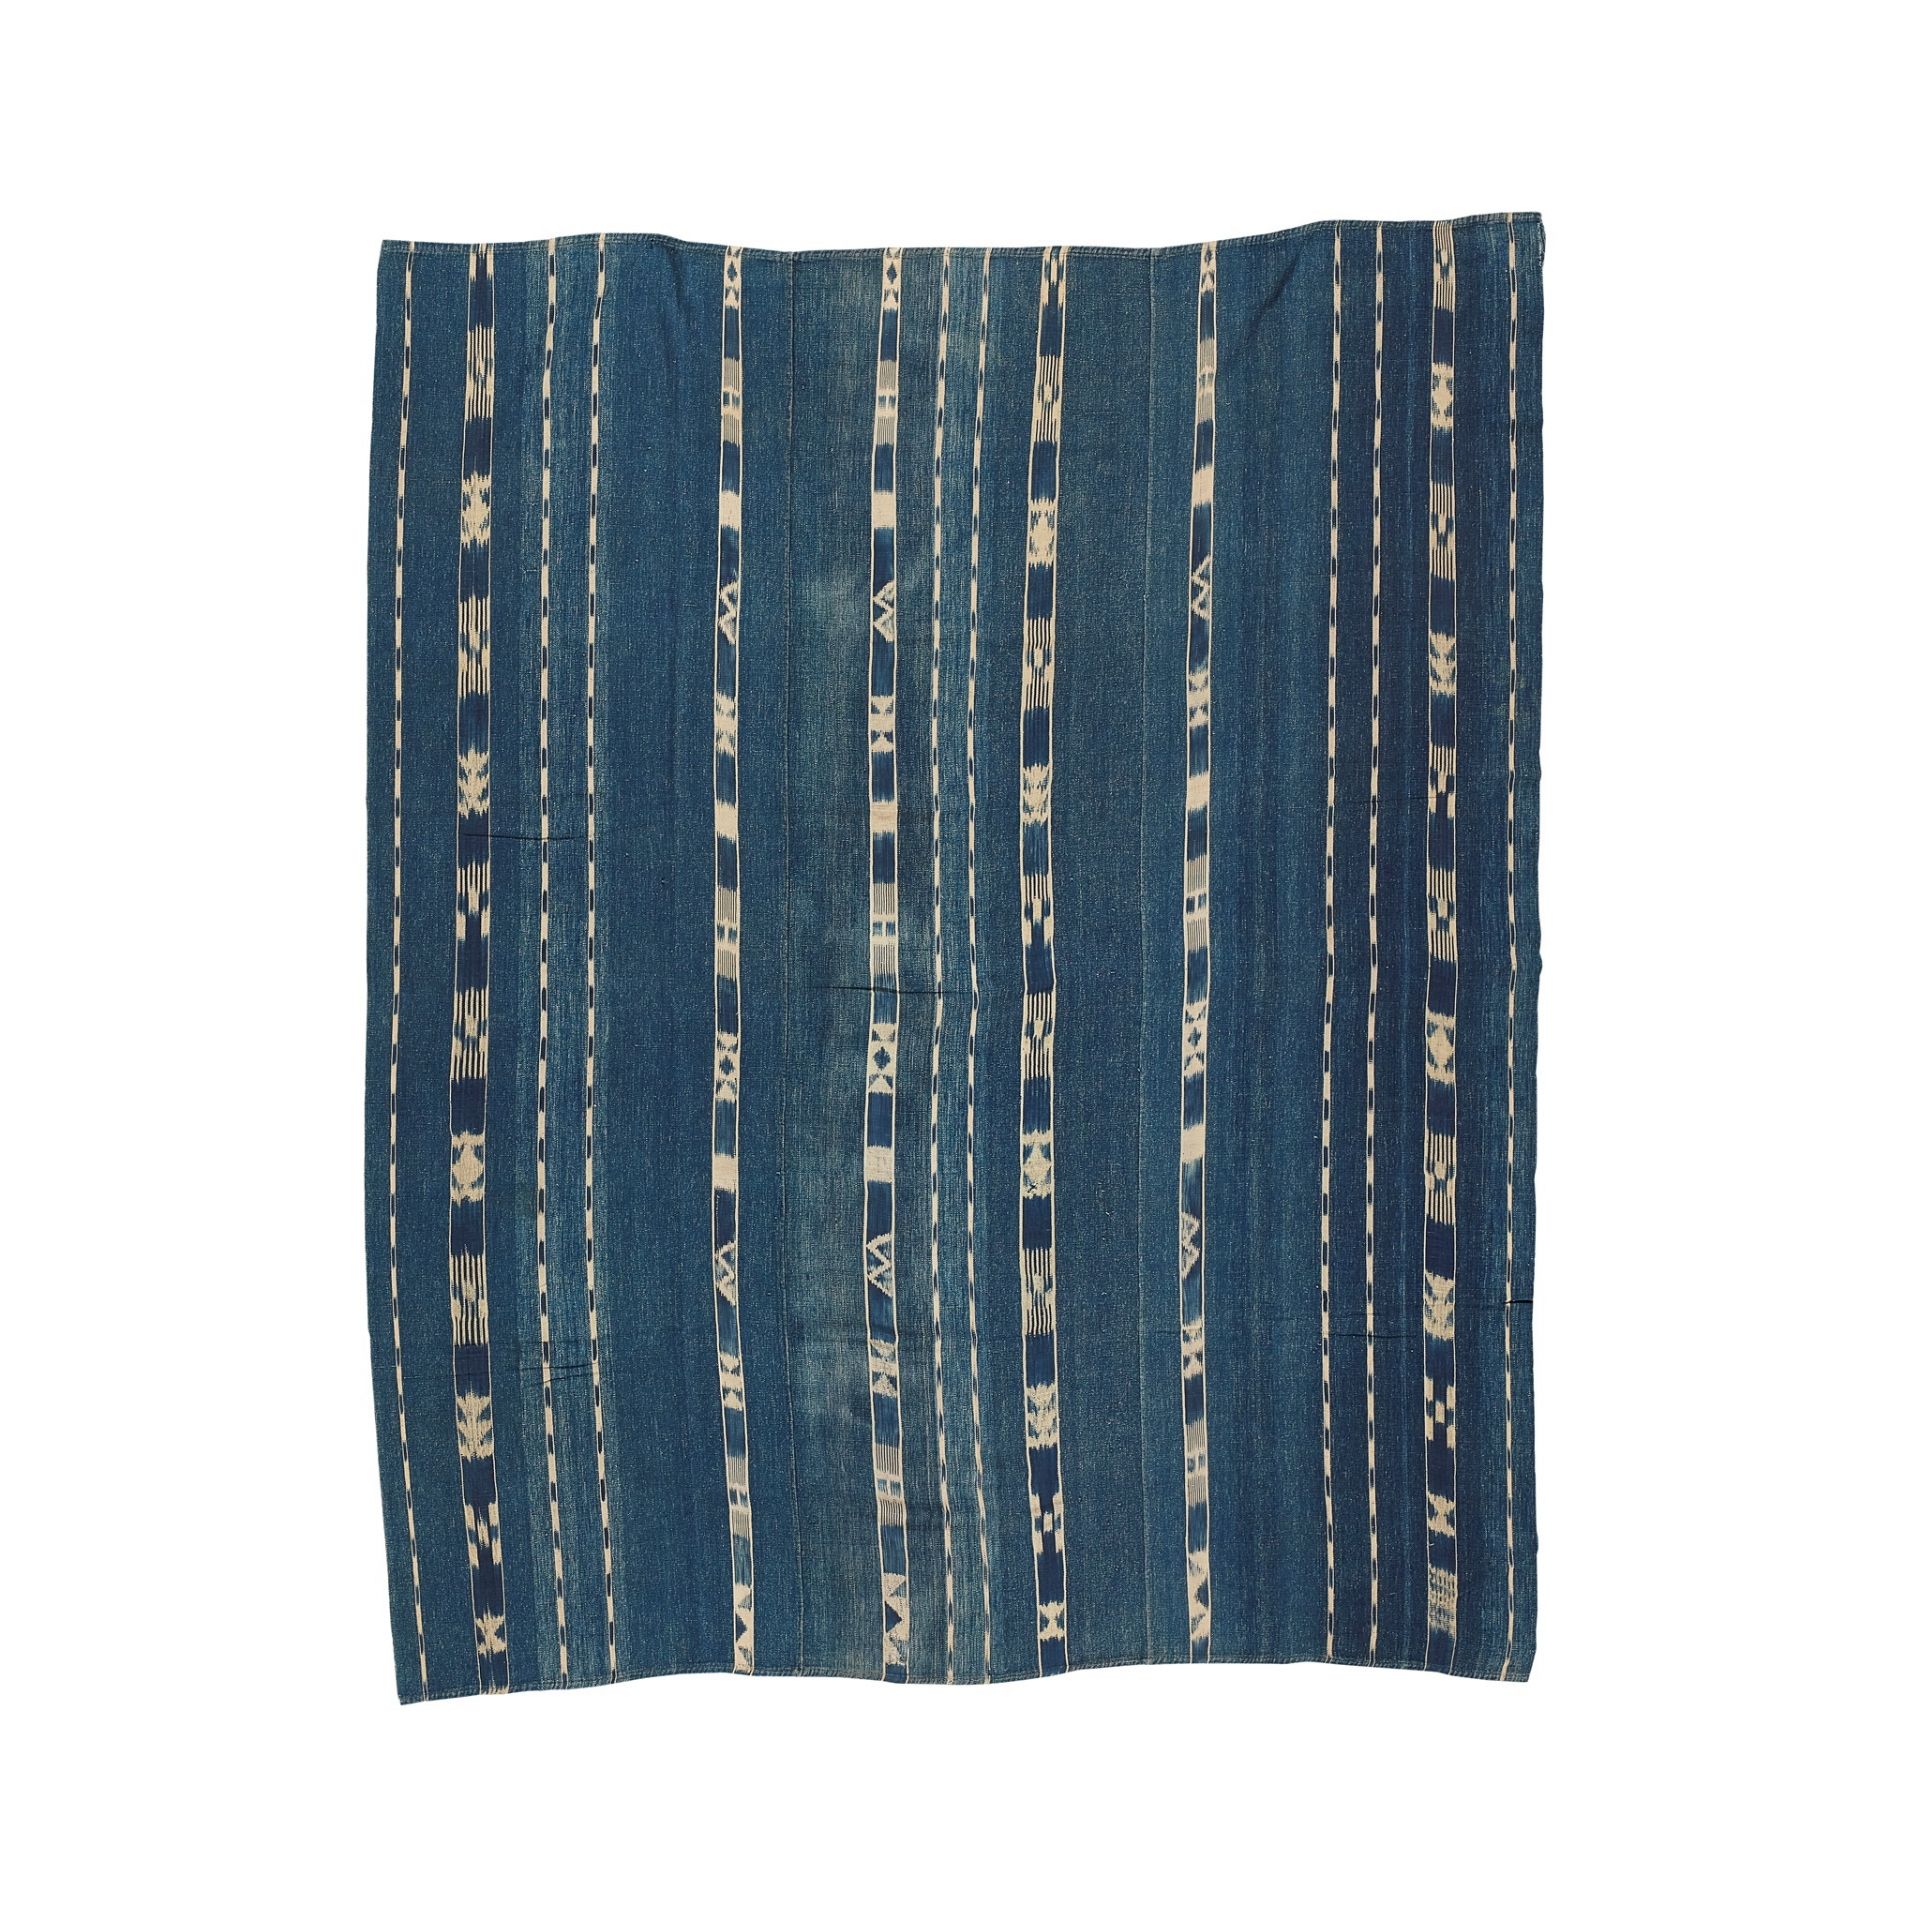 PUBLISHED TRIO OF WOMEN'S WRAPPER CLOTHS IGARRA, NIGERIA - Image 2 of 2